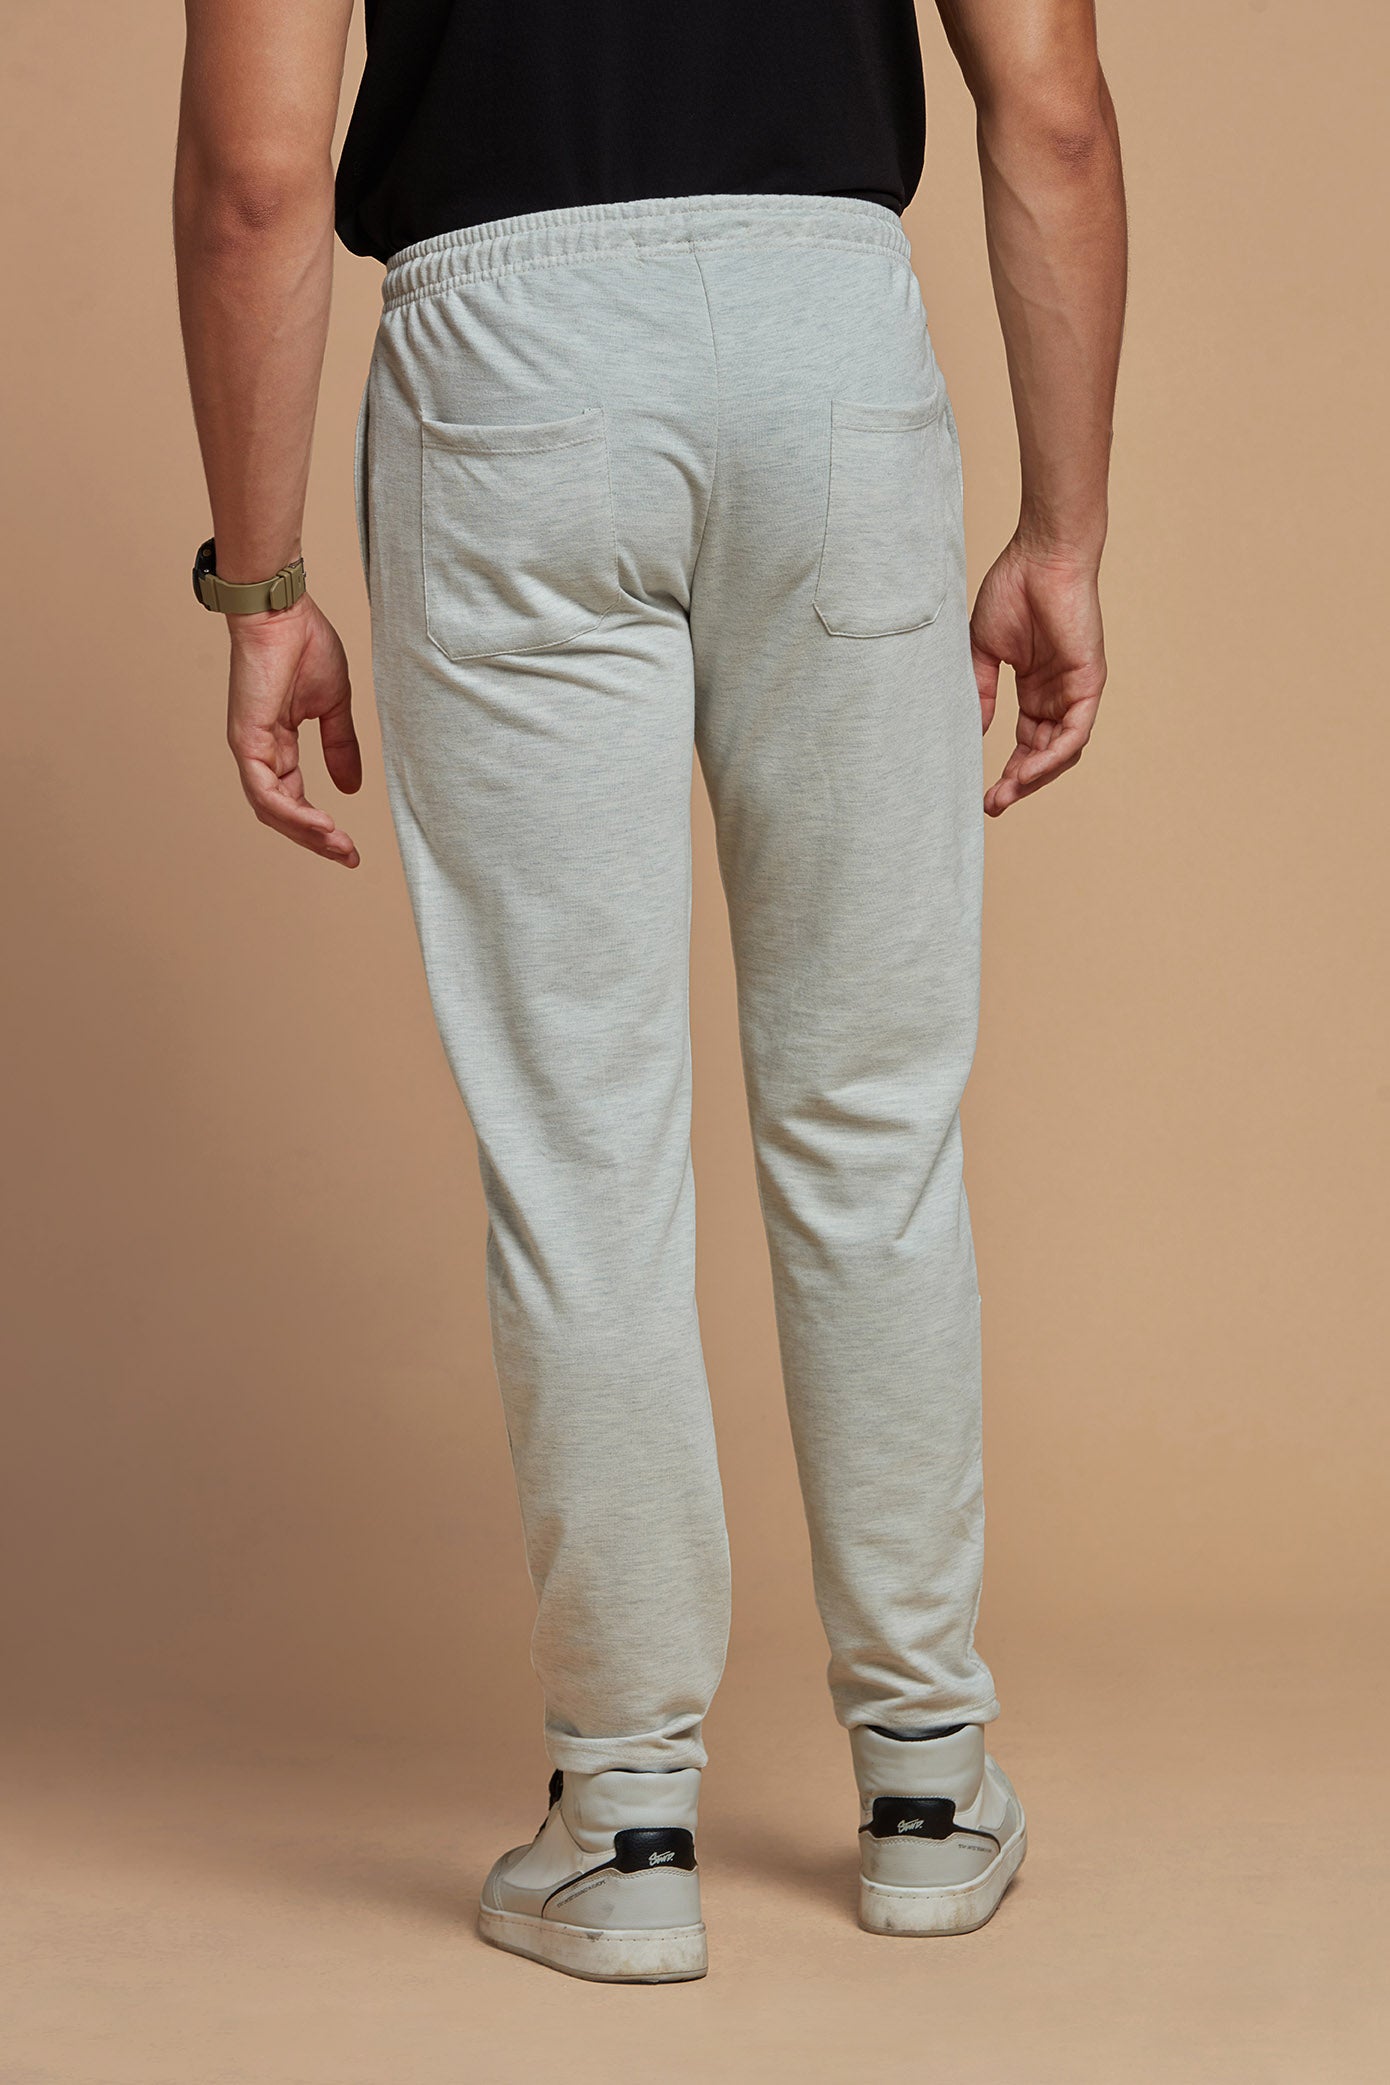 RusticBlooms Stylish and Comfortable White Track pant